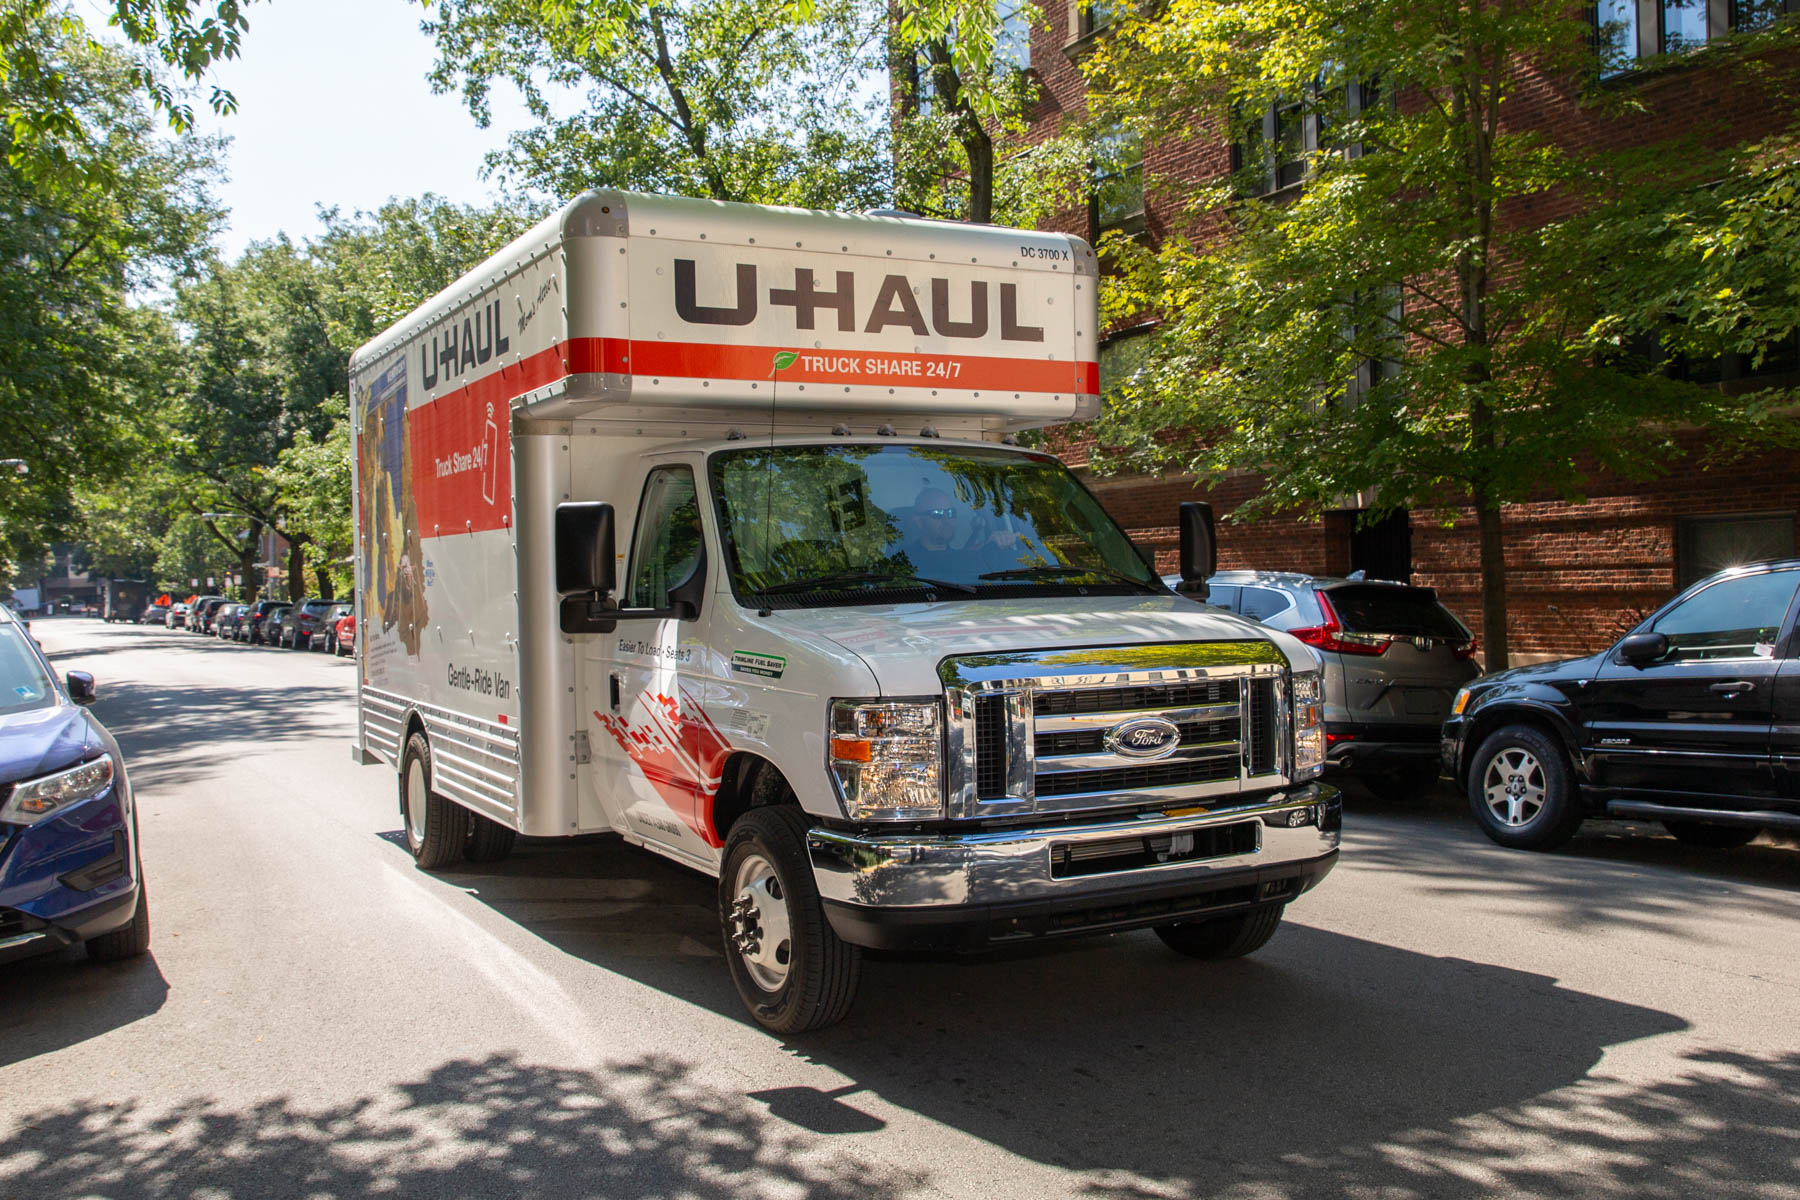 U-Haul Canadian Destination City No. 8: Kitchener Attracts Commuters, DIY Movers